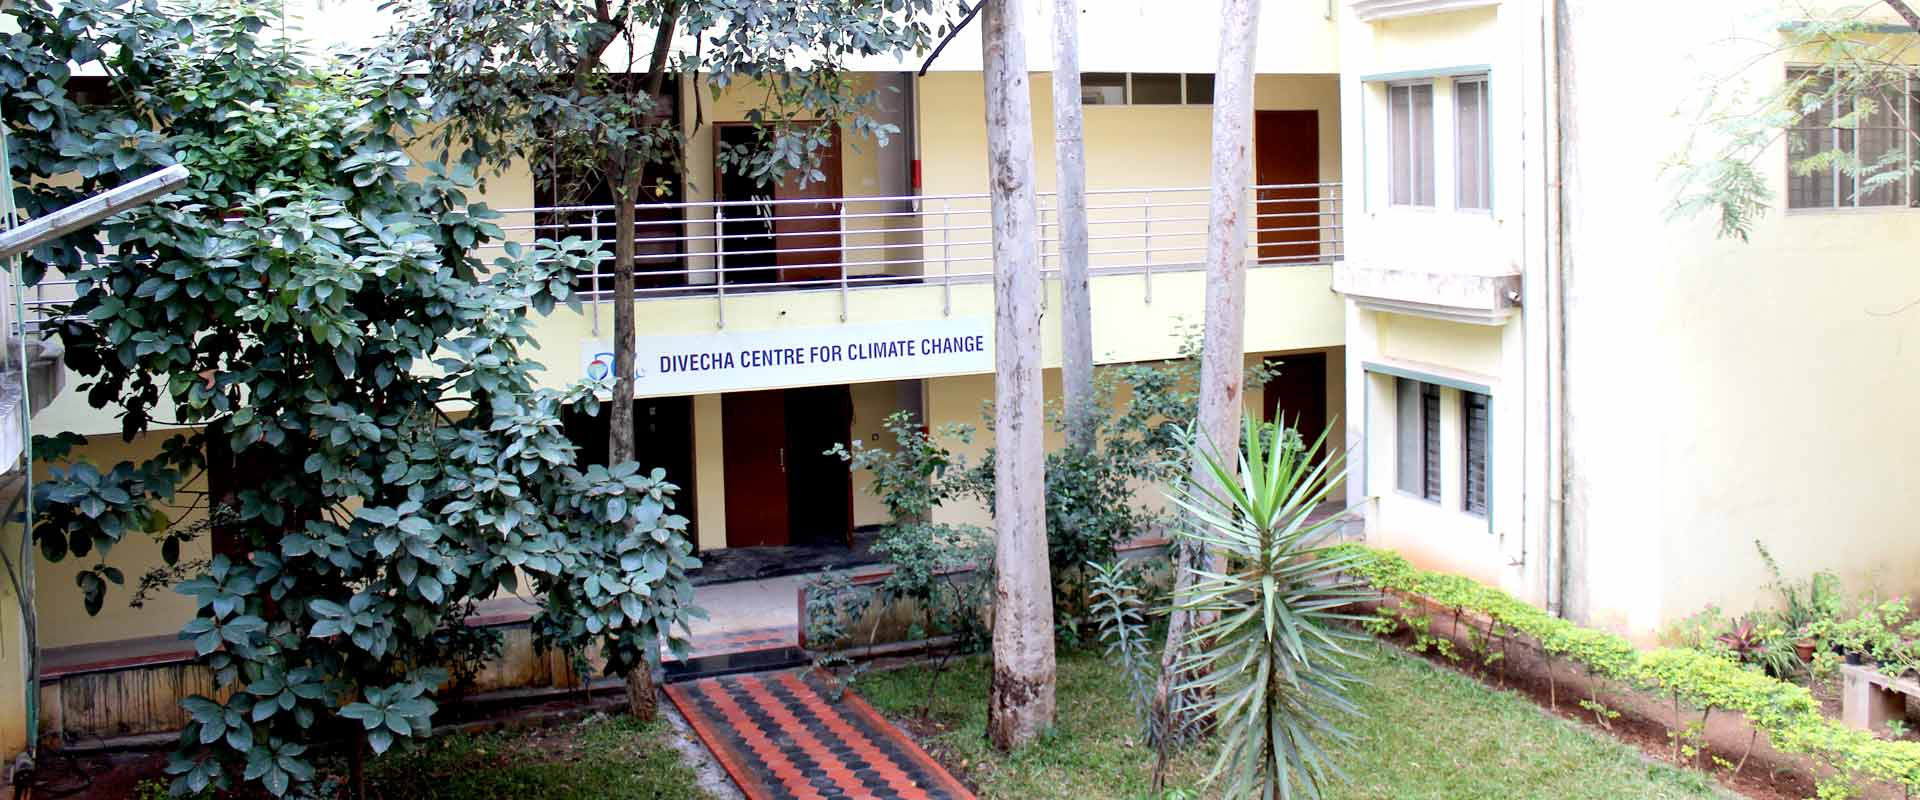 IISc, Divecha Centre for Climate Change Image